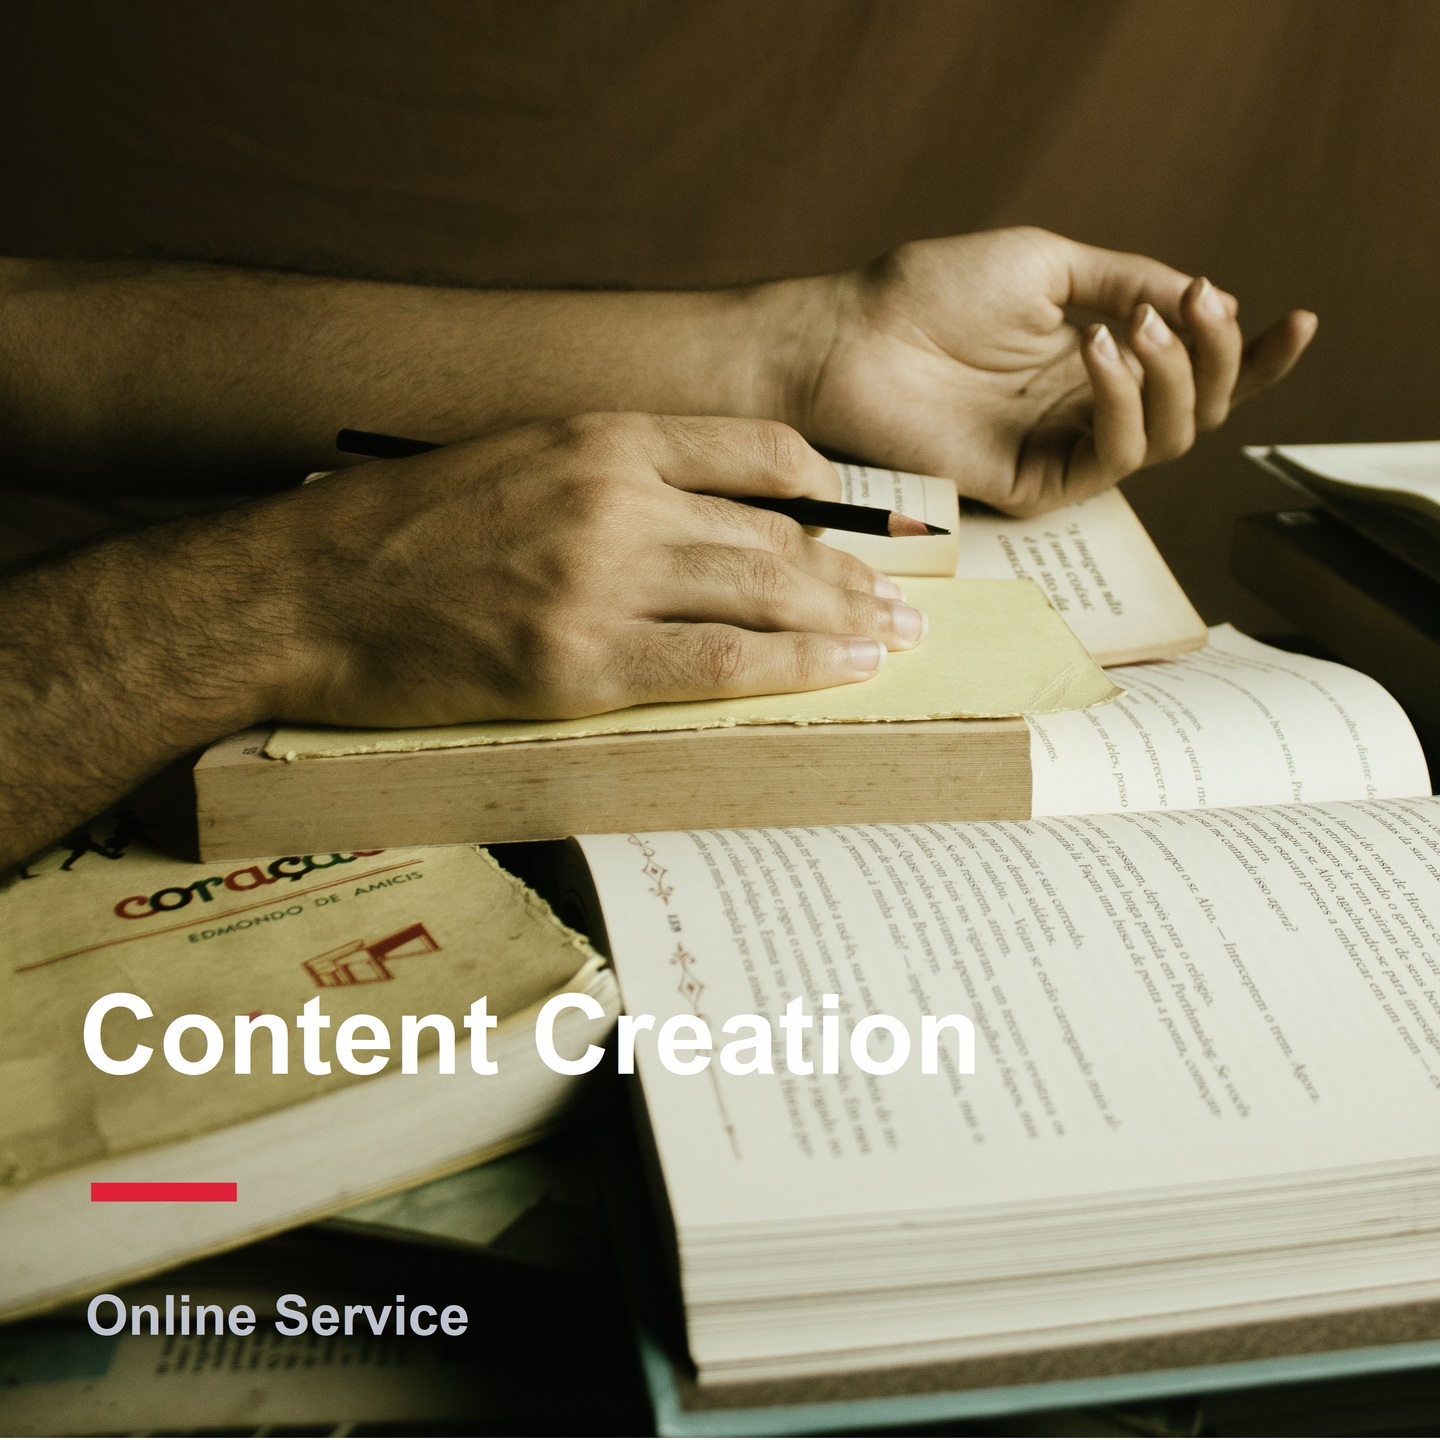 Content Creation (1251-2500 words, up to 8 pages)